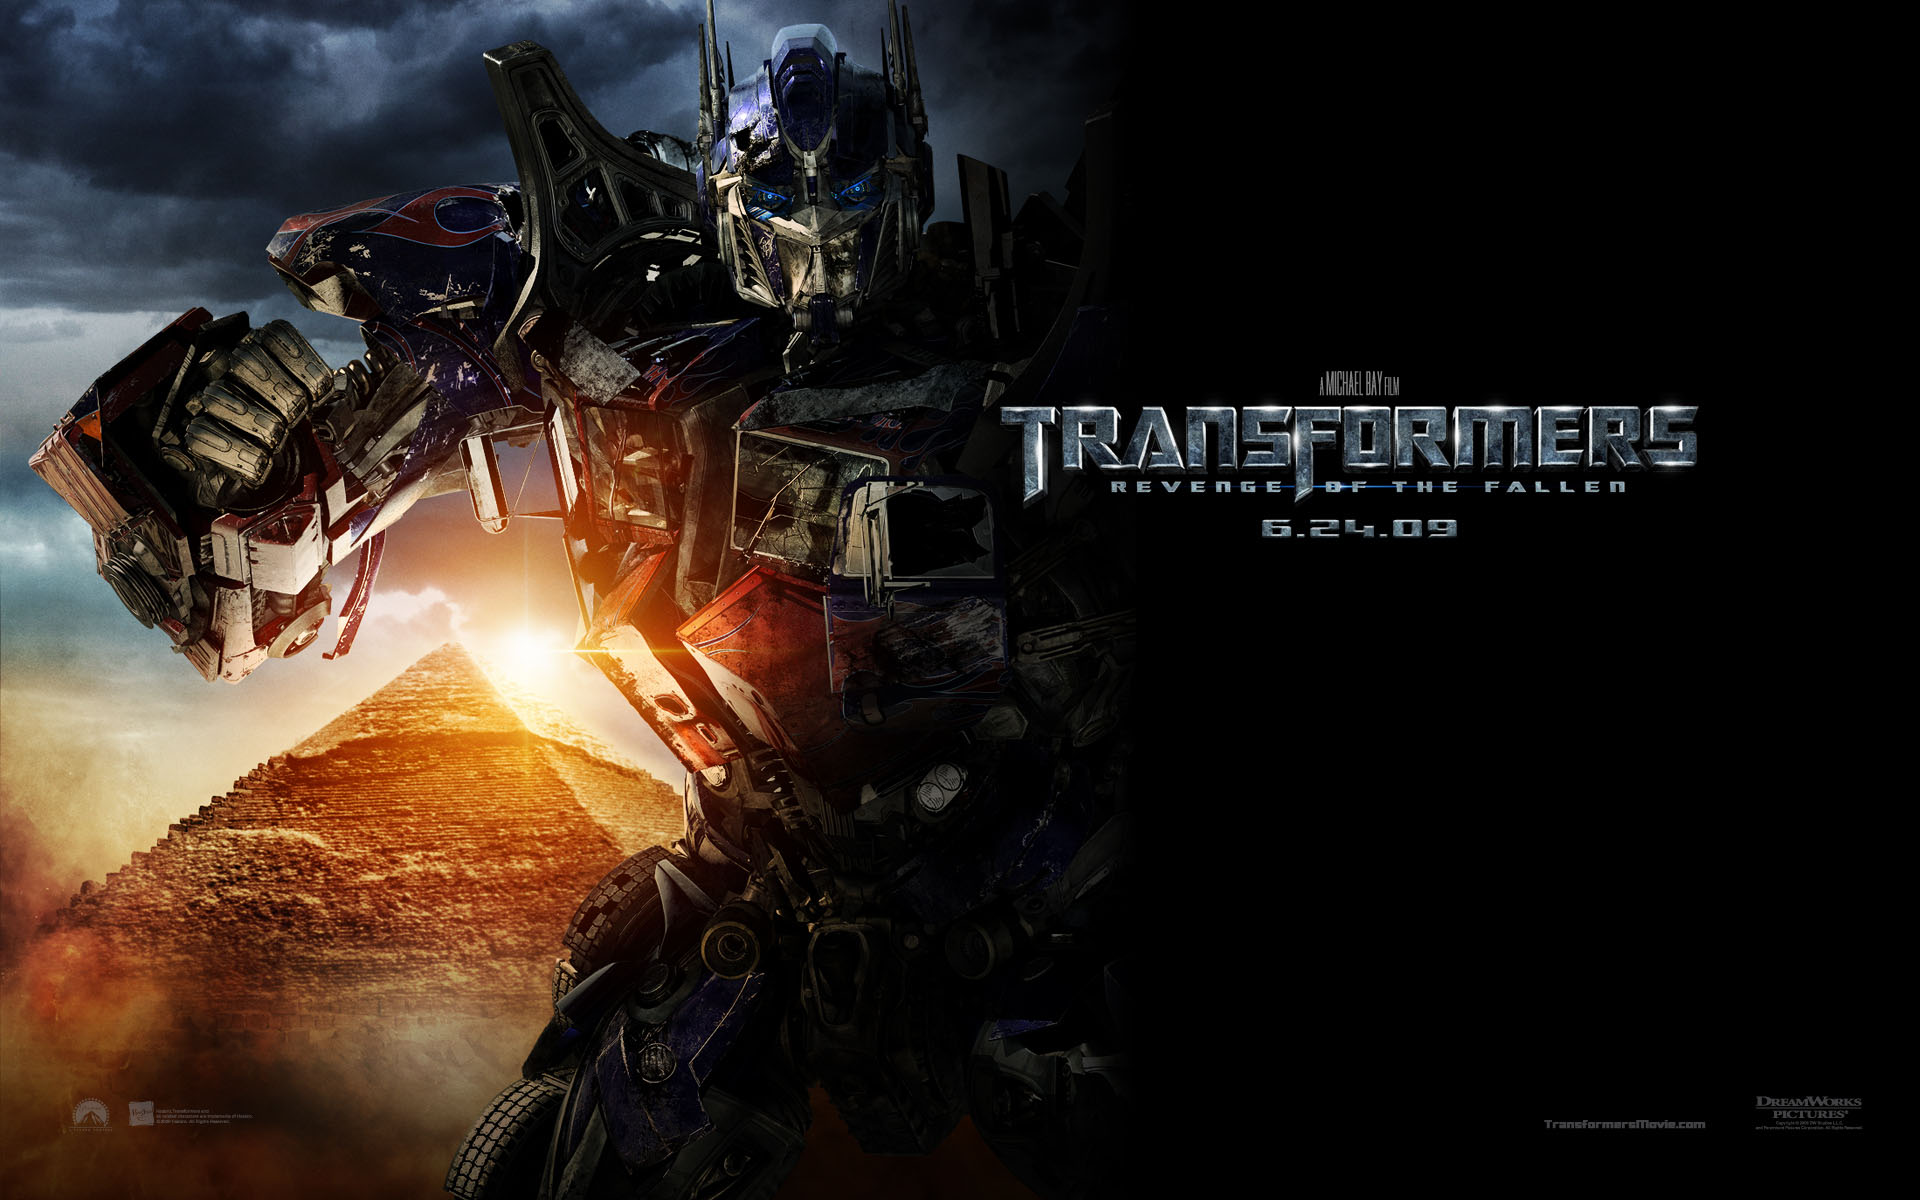 Optimus Prime Autobot from Transformers Revenge of the Fallen movie